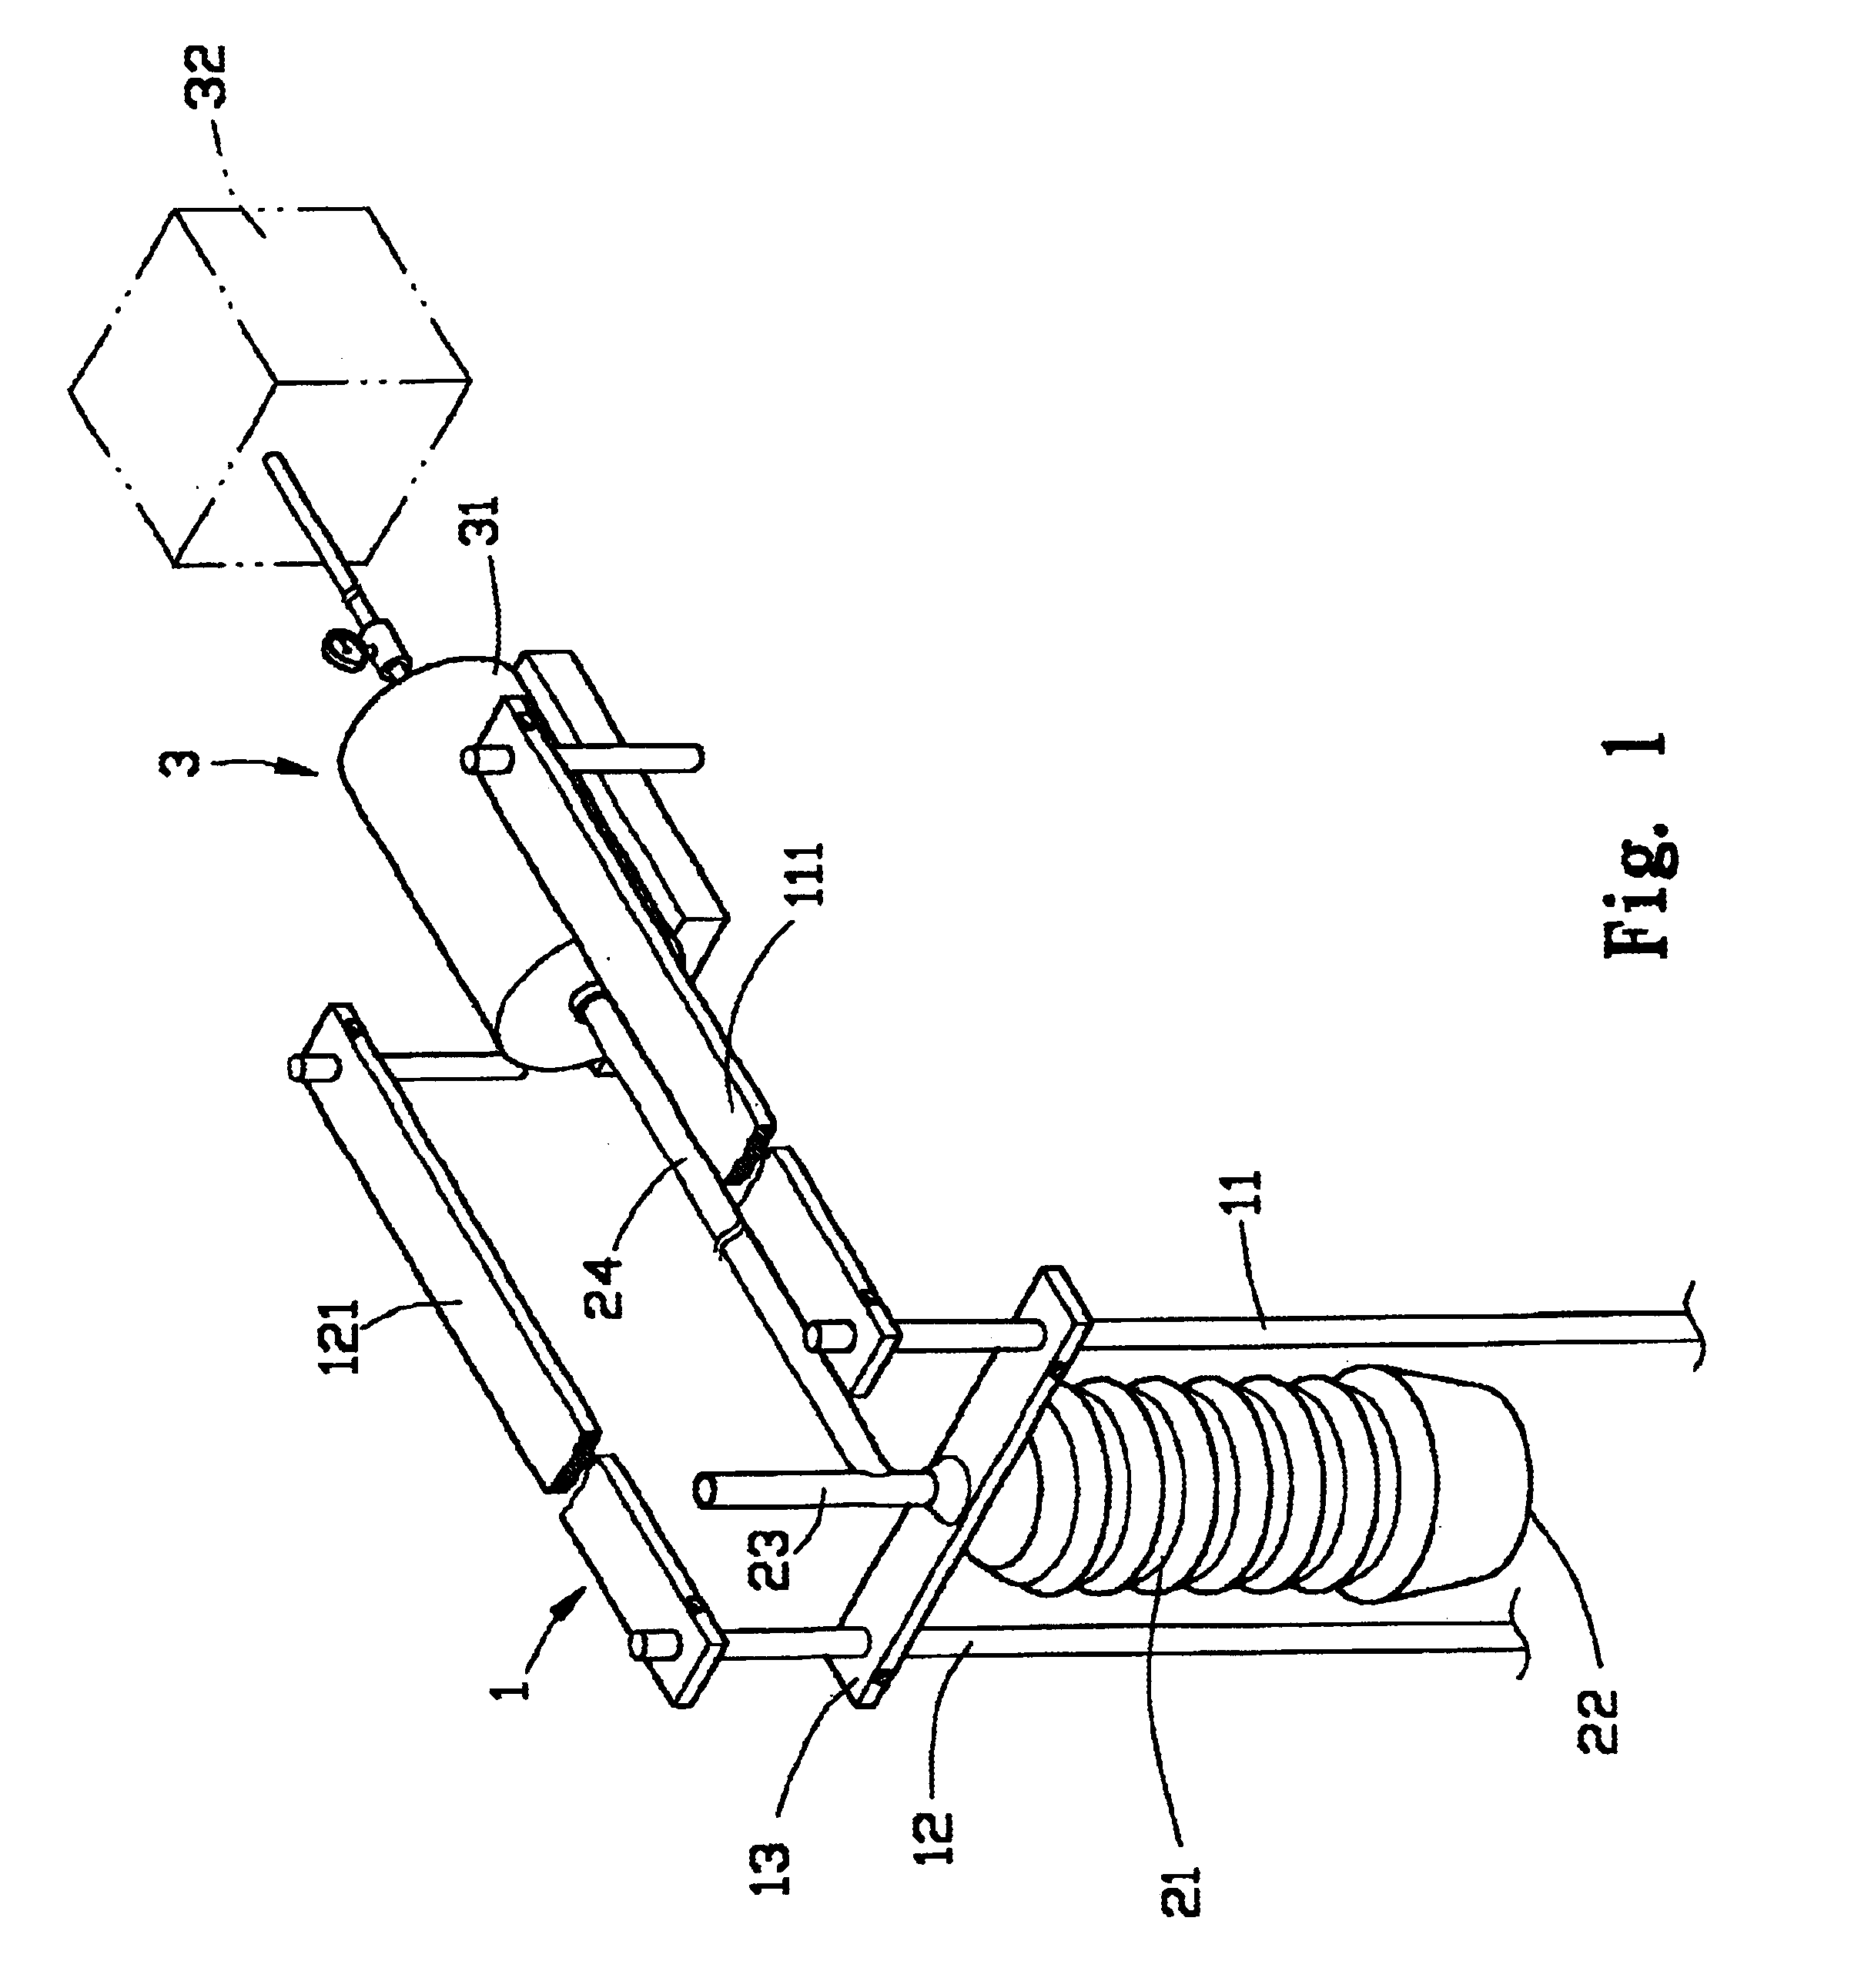 Power generating machine with a bellows adaptable to sea waves so as to drive a generator